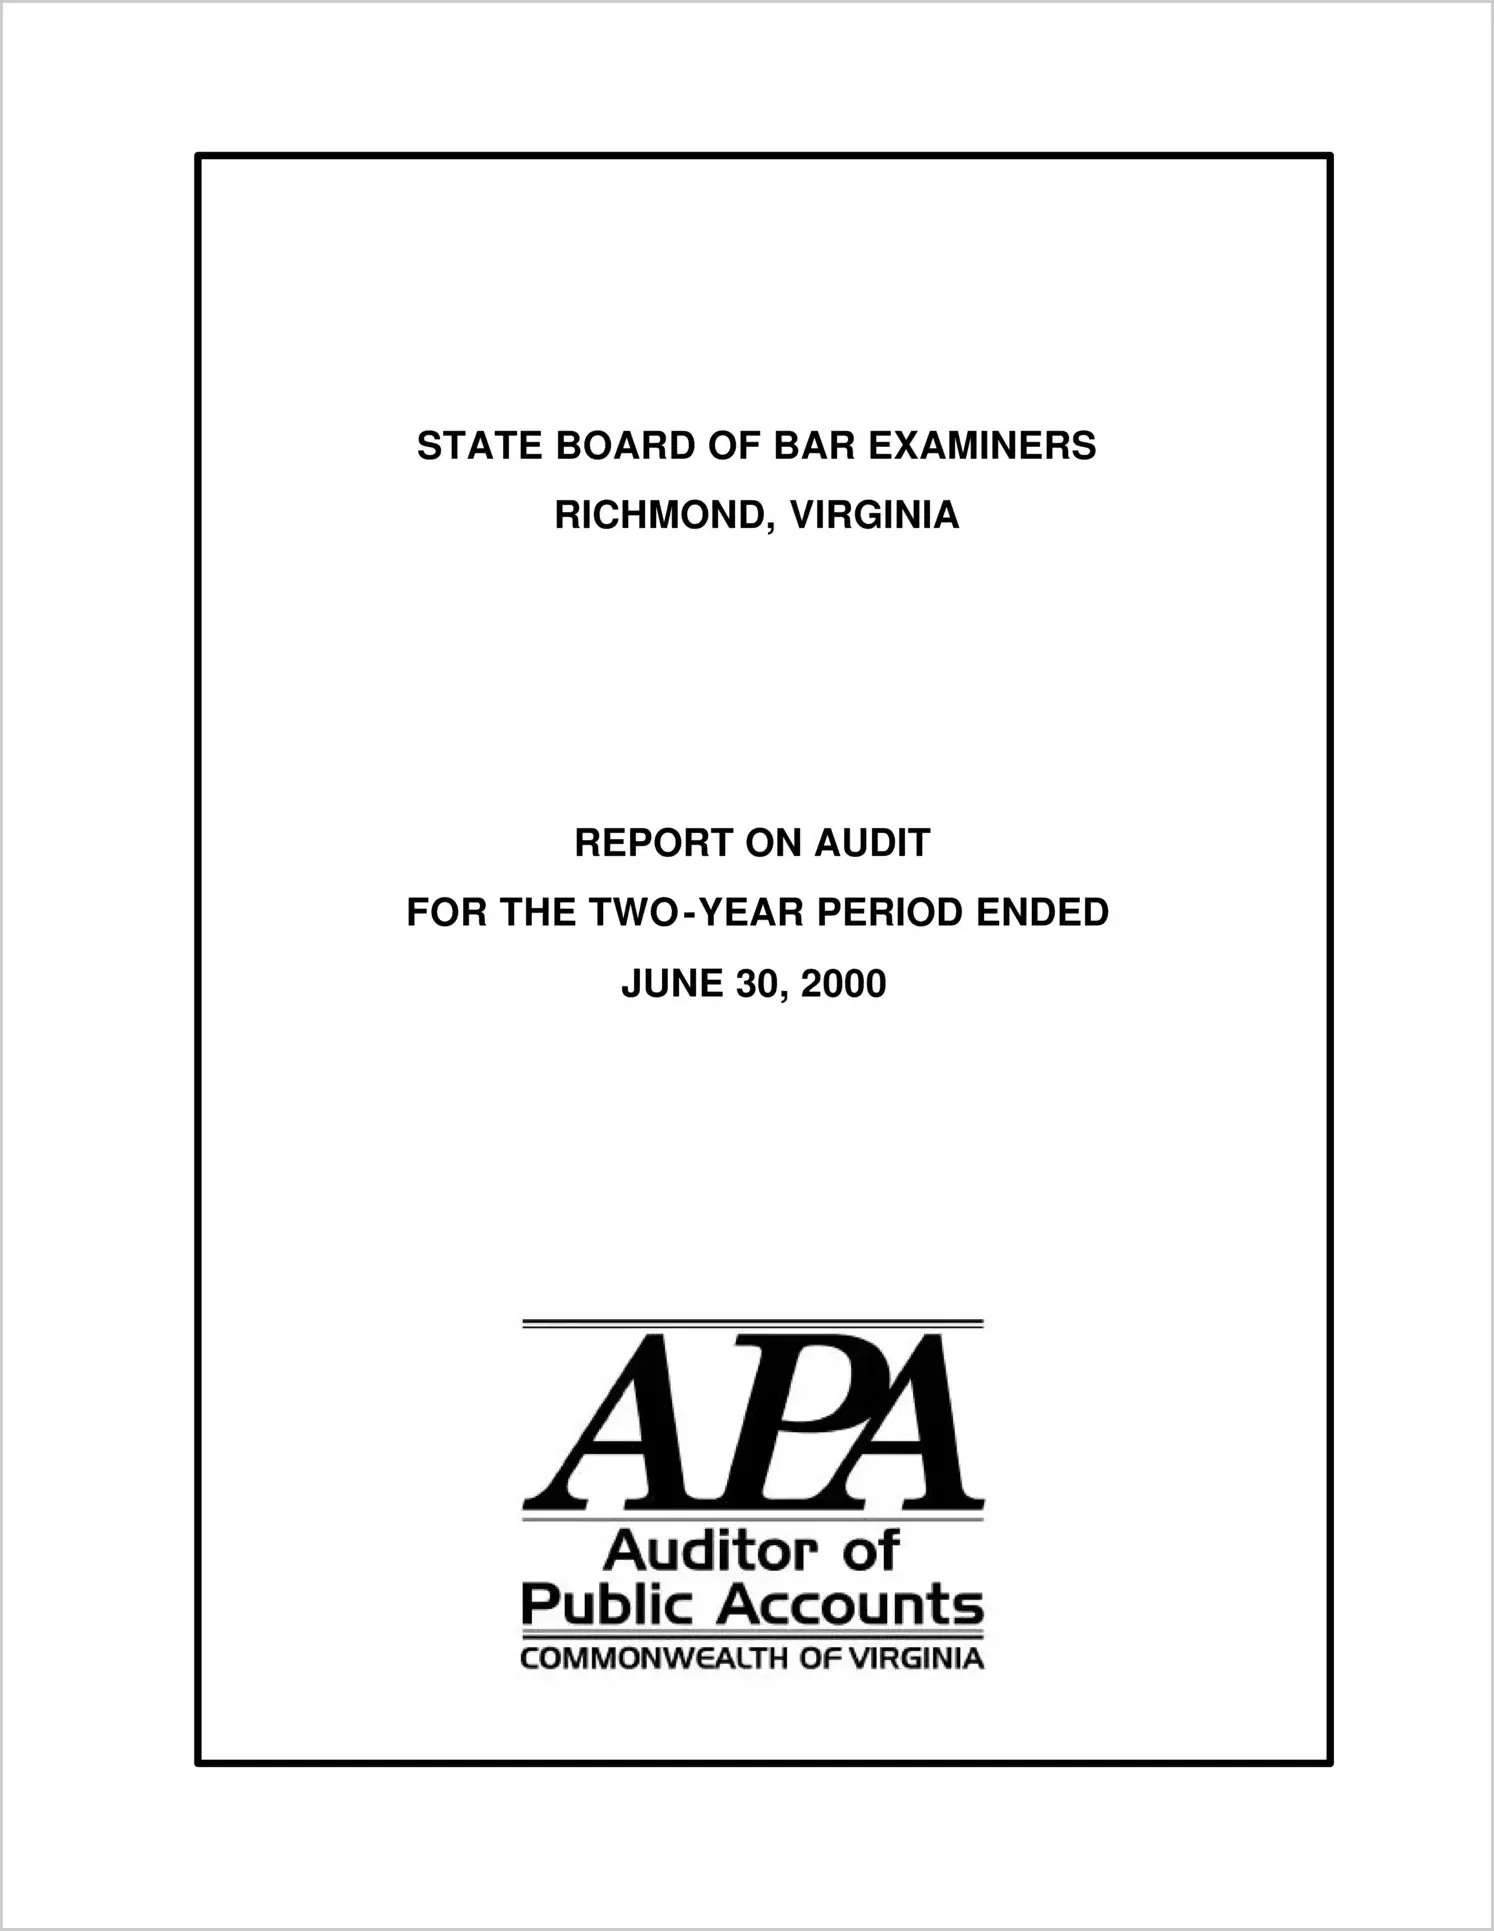 State Board of Bar Examiners for the two year period ended June 30, 2000